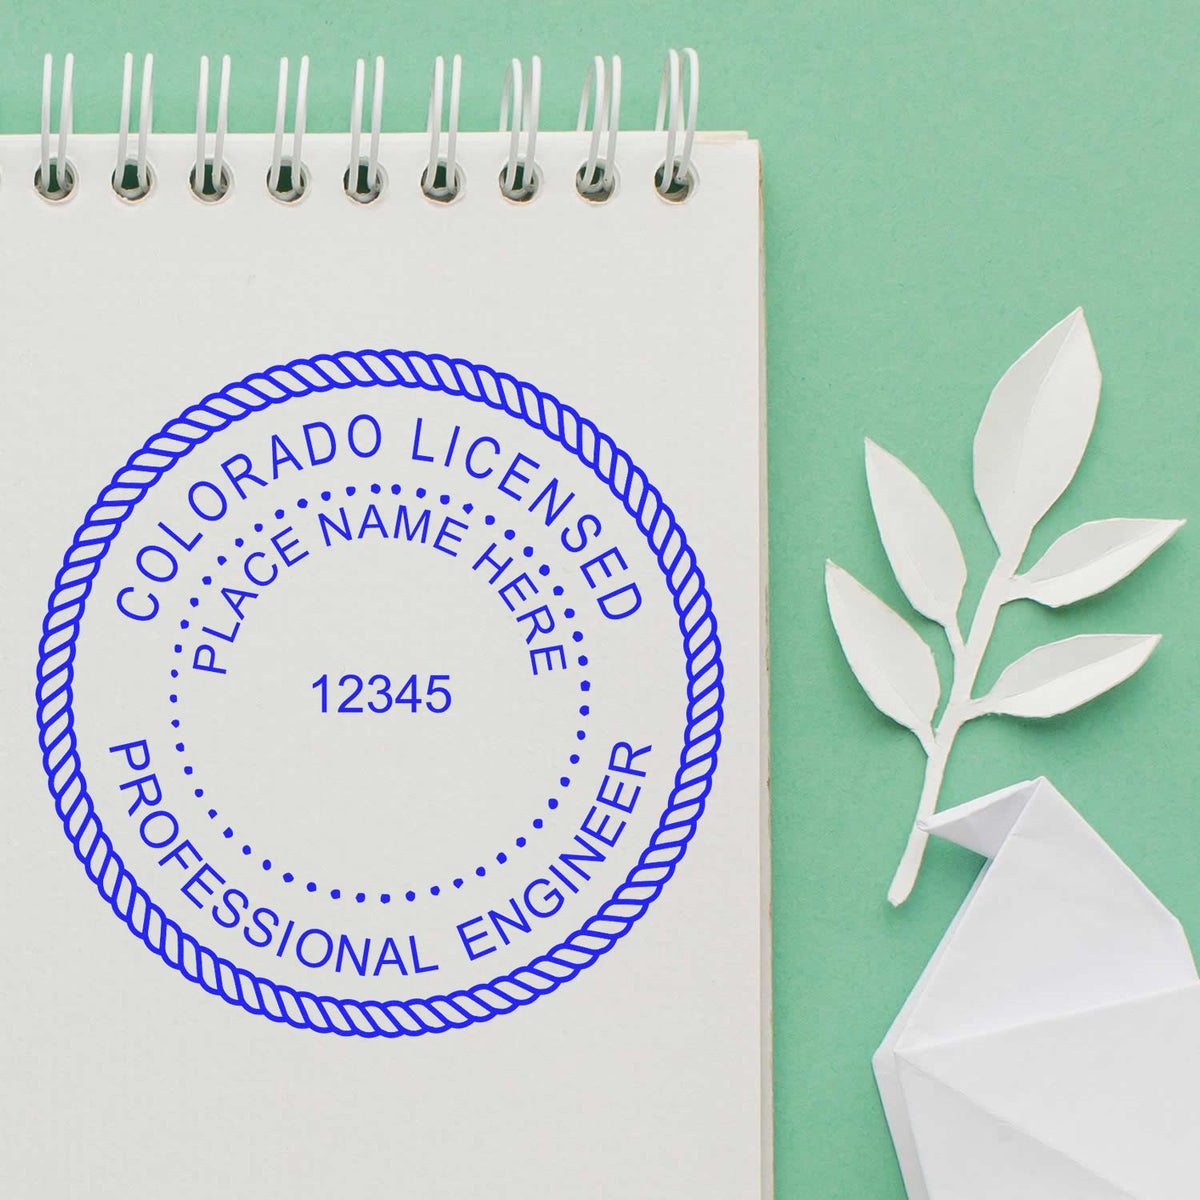 The Digital Colorado PE Stamp and Electronic Seal for Colorado Engineer stamp impression comes to life with a crisp, detailed photo on paper - showcasing true professional quality.